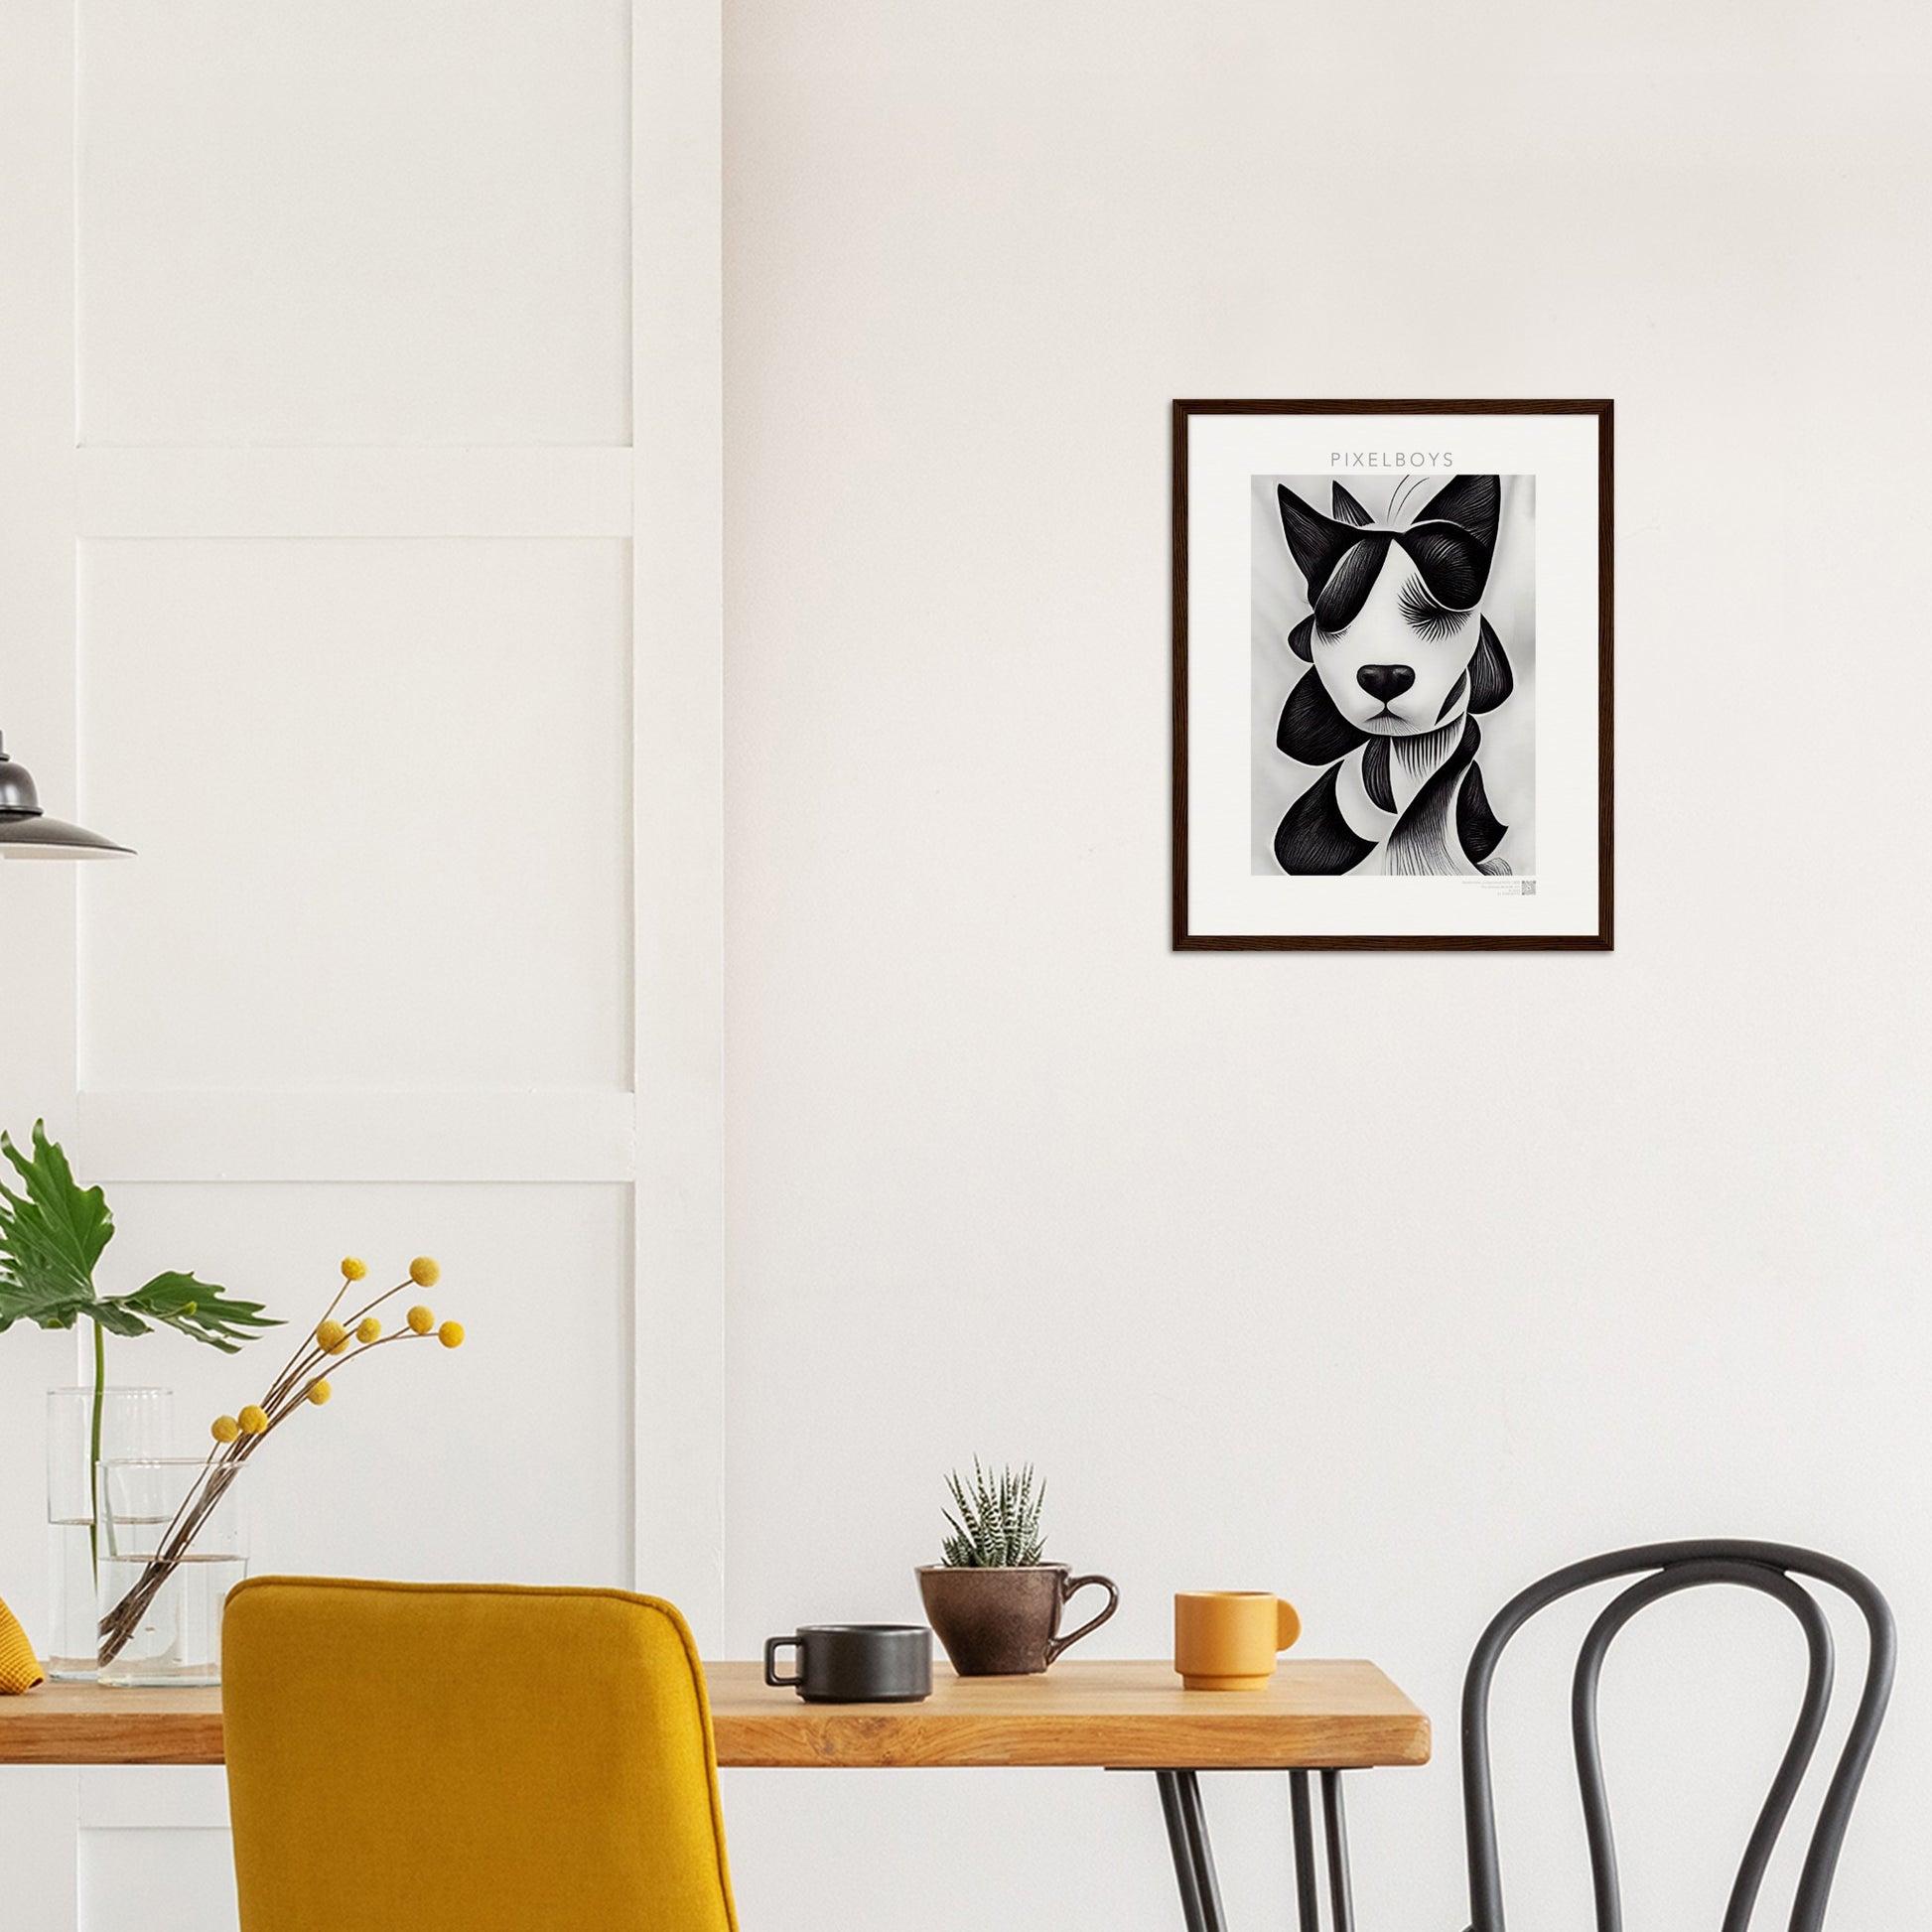 Poster mit Rahmen (Holz) - in Museumsqualität - Doodlemania "a dog named Muffin"- No.4 - Wandbild - doodle mania art collection - wall art - Hunde - Doodle Kunst - dogs- doodle posters and art prints - Poster mit Rahmen - doodle artwork - Acrylbild - Kunstdruck - Wandbild - office Poster - Poster with frame -  Künstler: Pixelboys & The Unknown Artist Nb.517 - keith haring - Gastro Art - anti stress art - Art Brand - Kunstdruck -